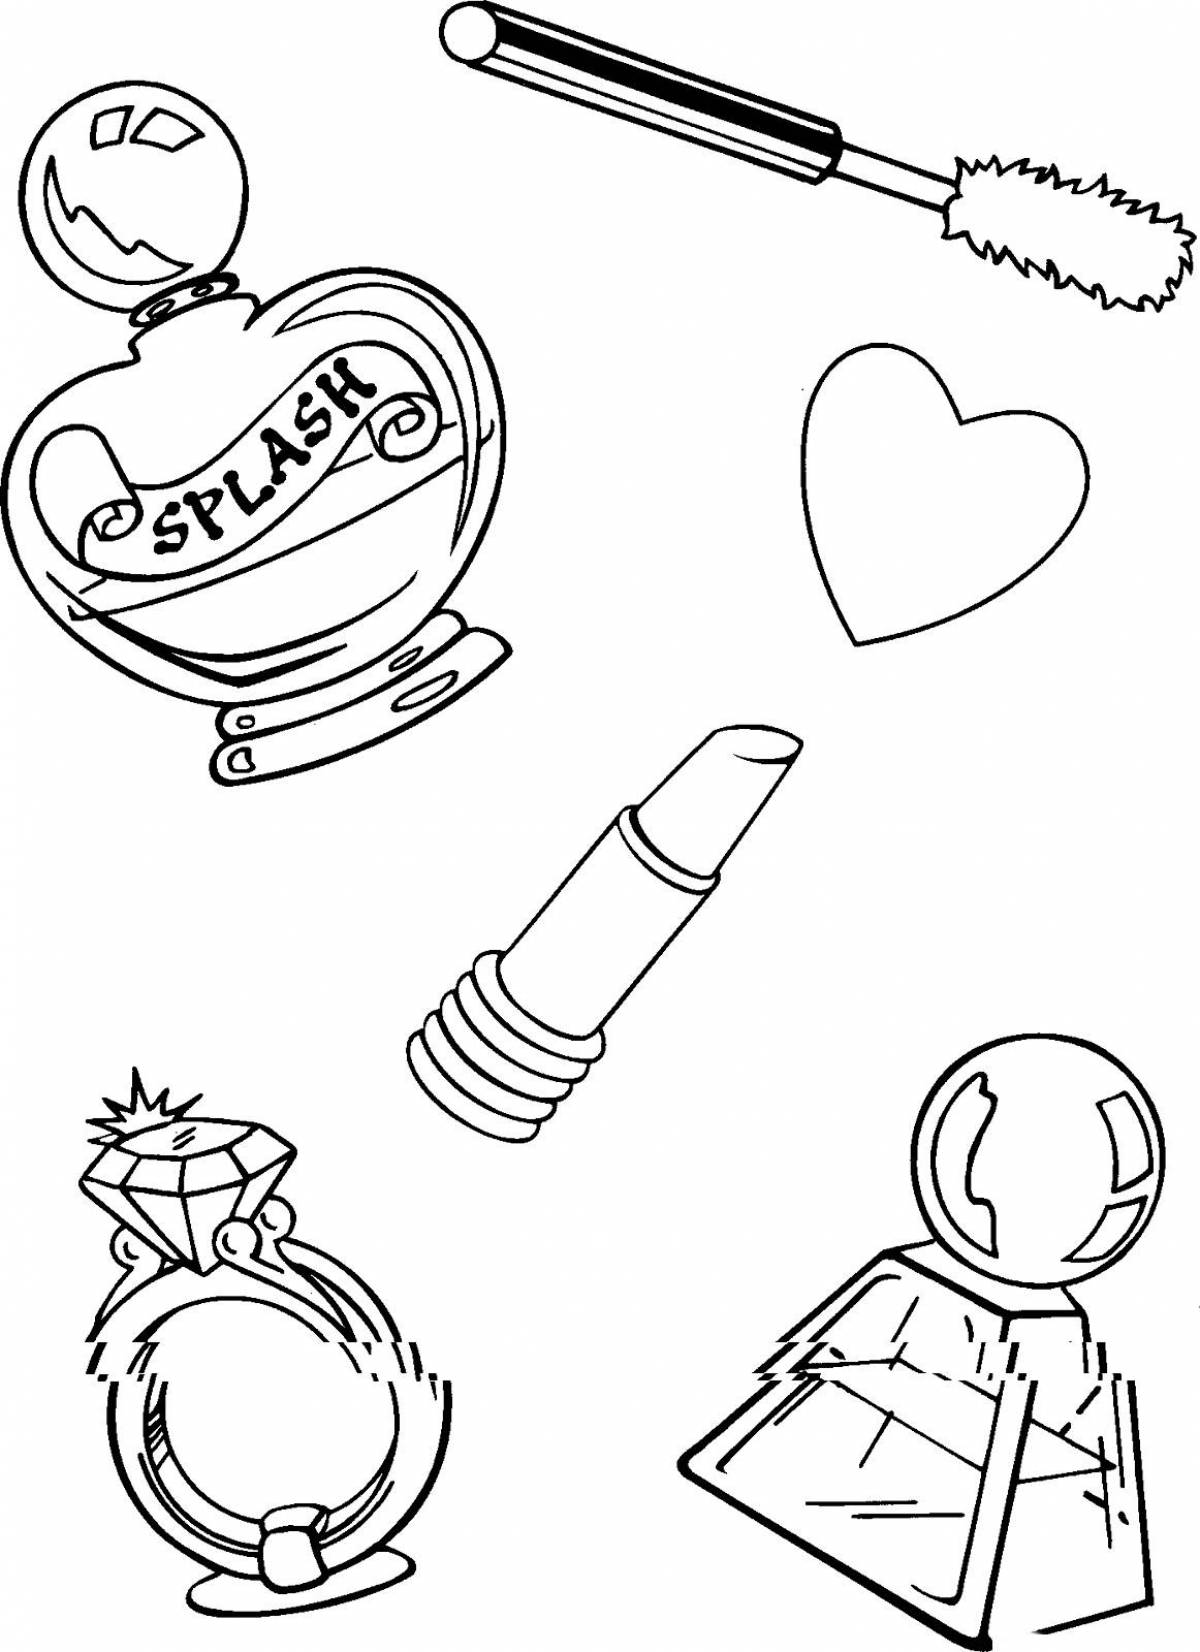 Great cosmetics coloring page